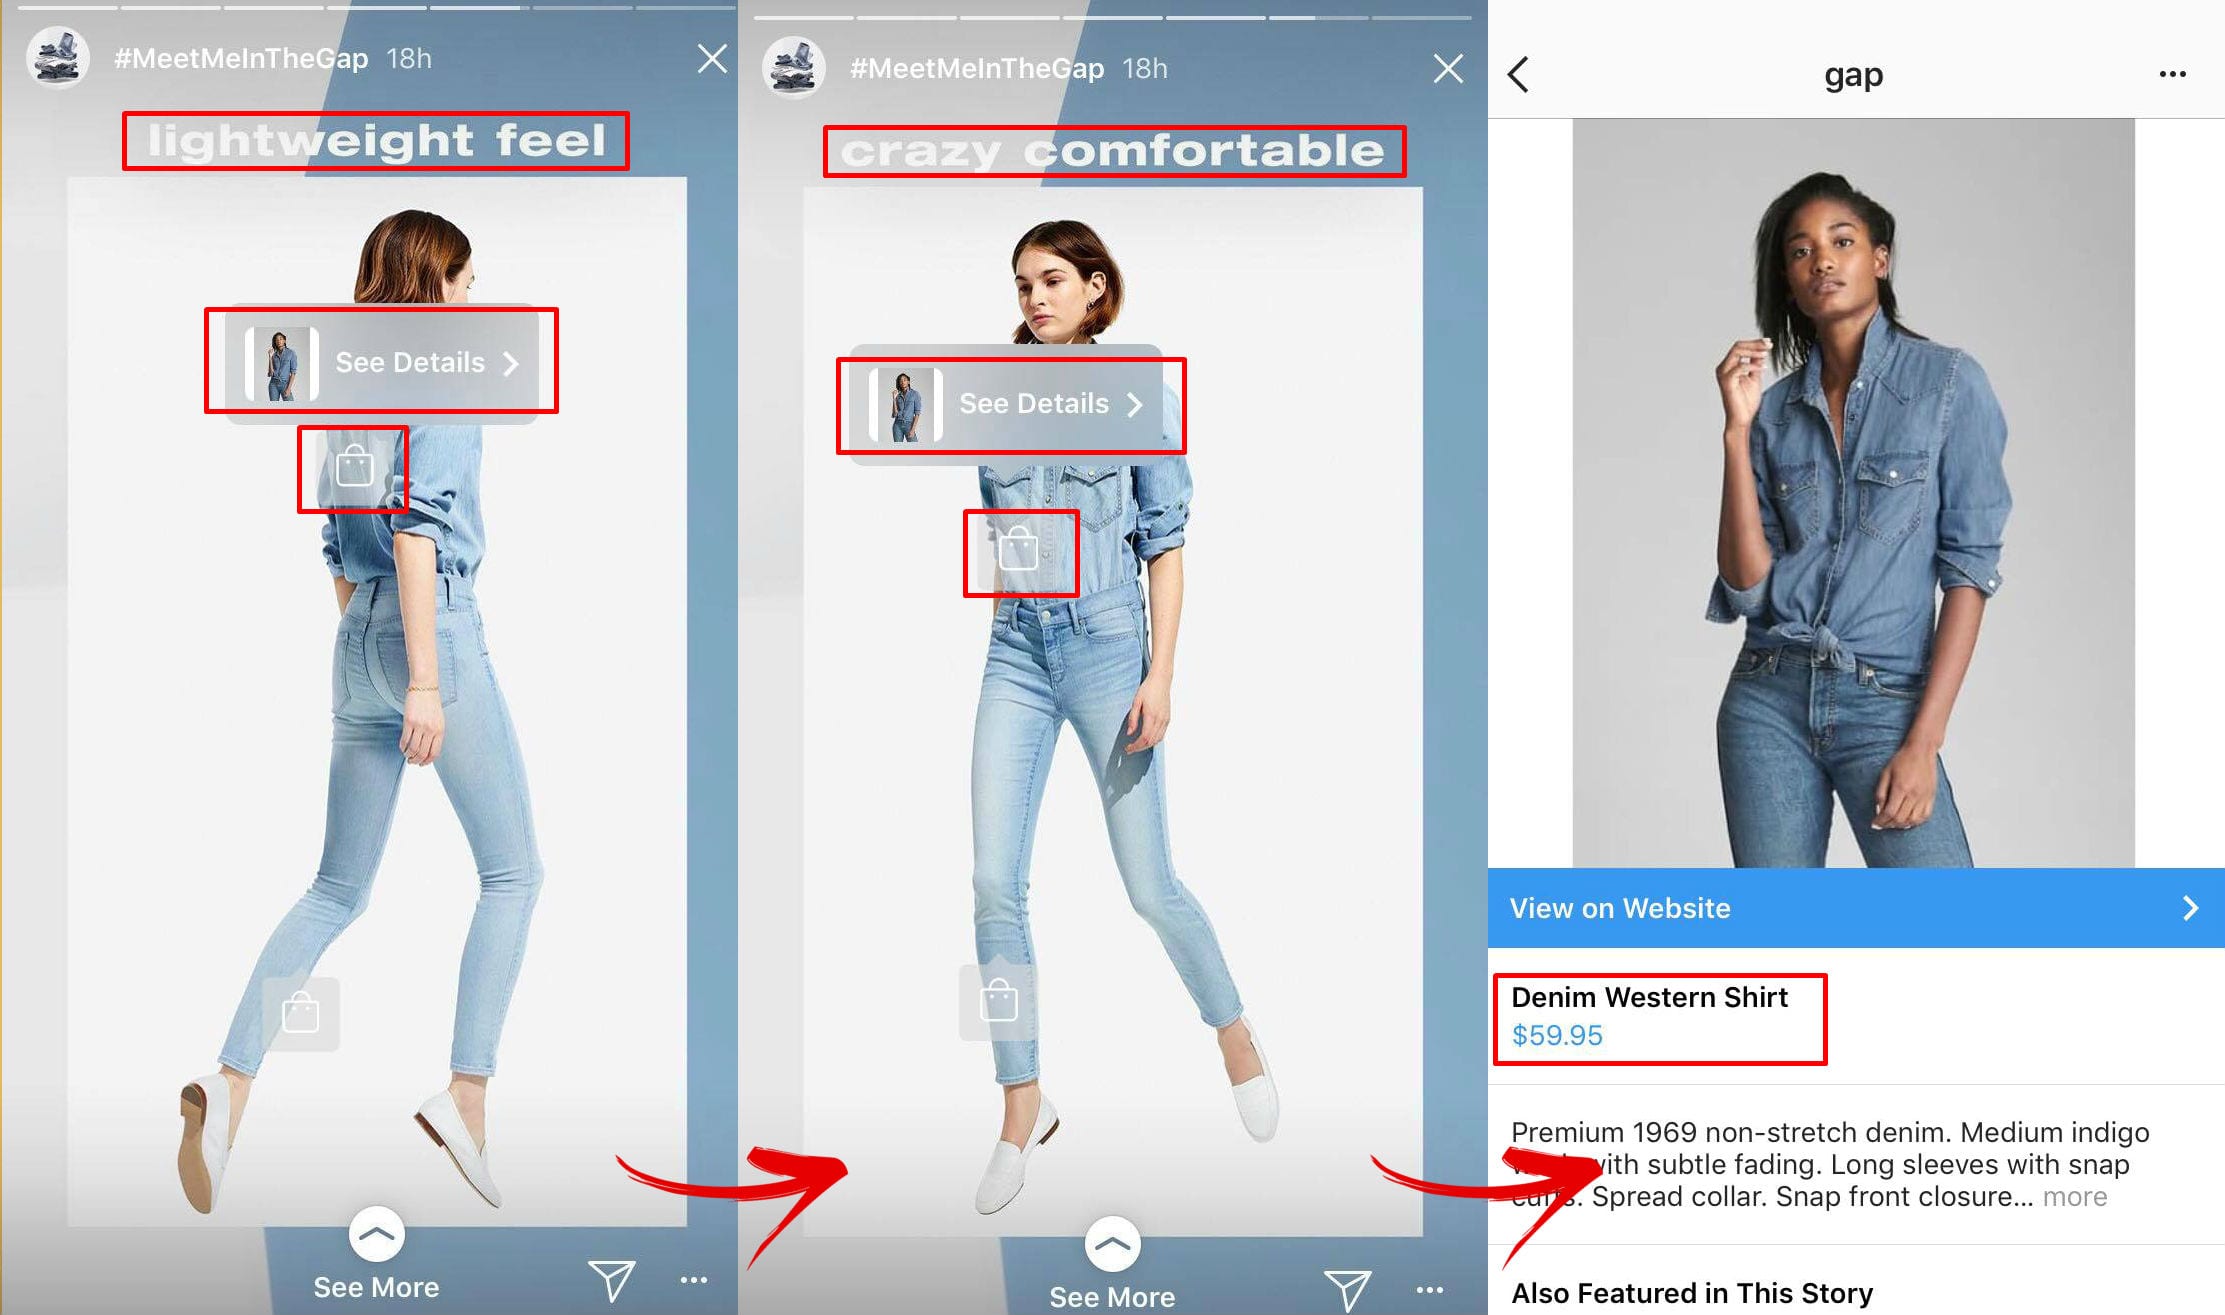 showoff GAP - Cracking Instagram's Code with Ephemeral Content